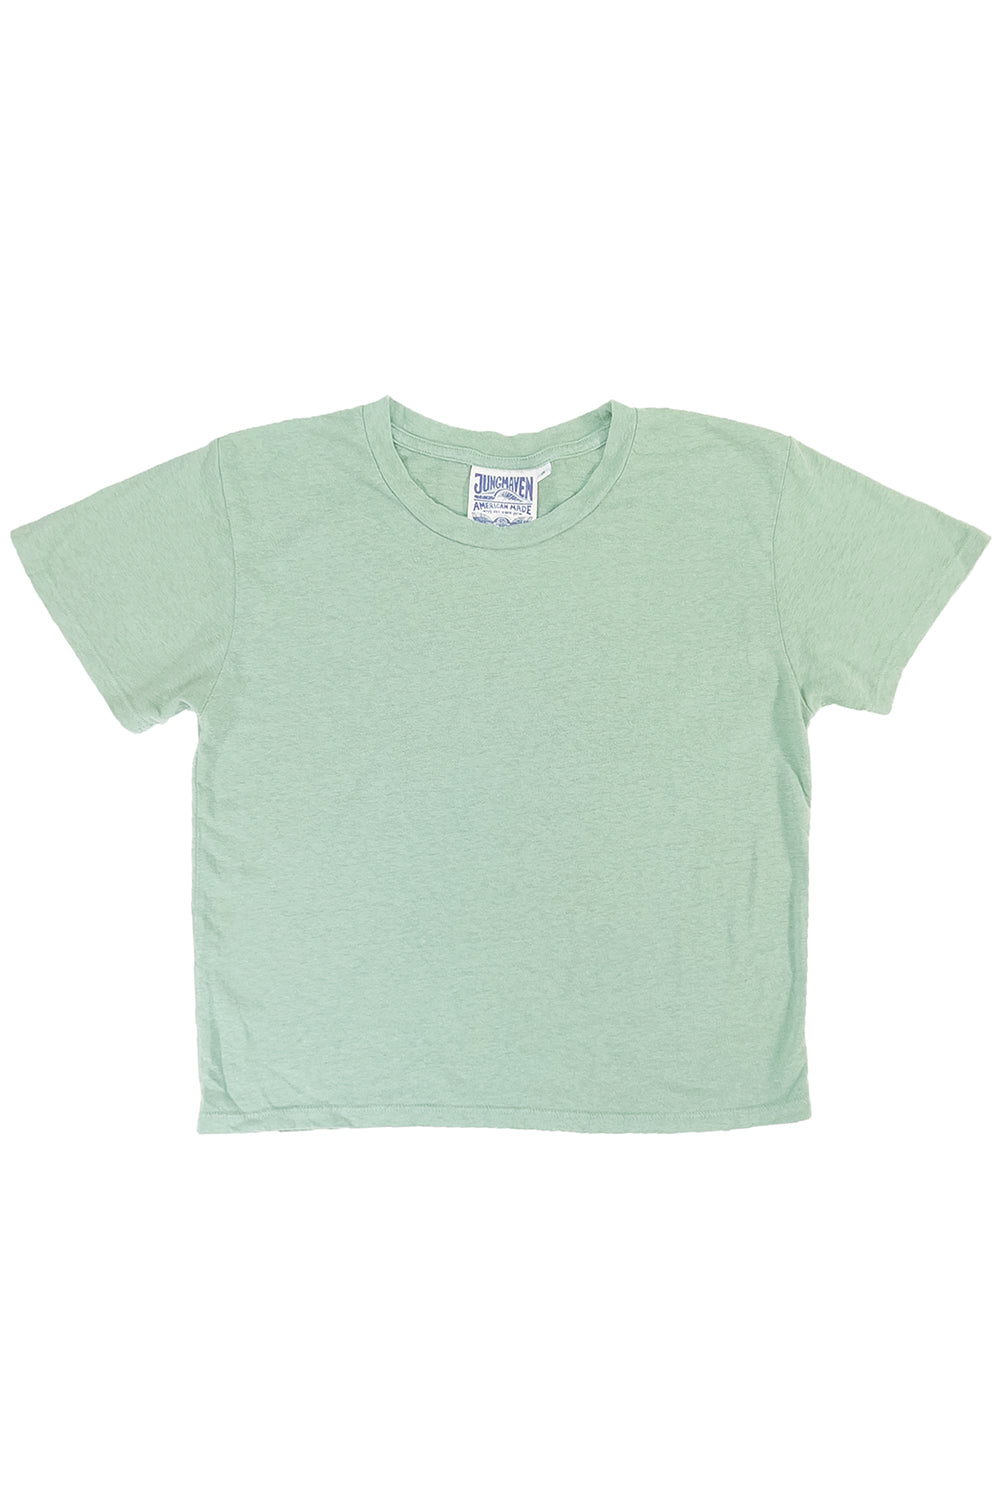 Cropped Lorel Tee | Jungmaven Hemp Clothing & Accessories / Color: Sage Green